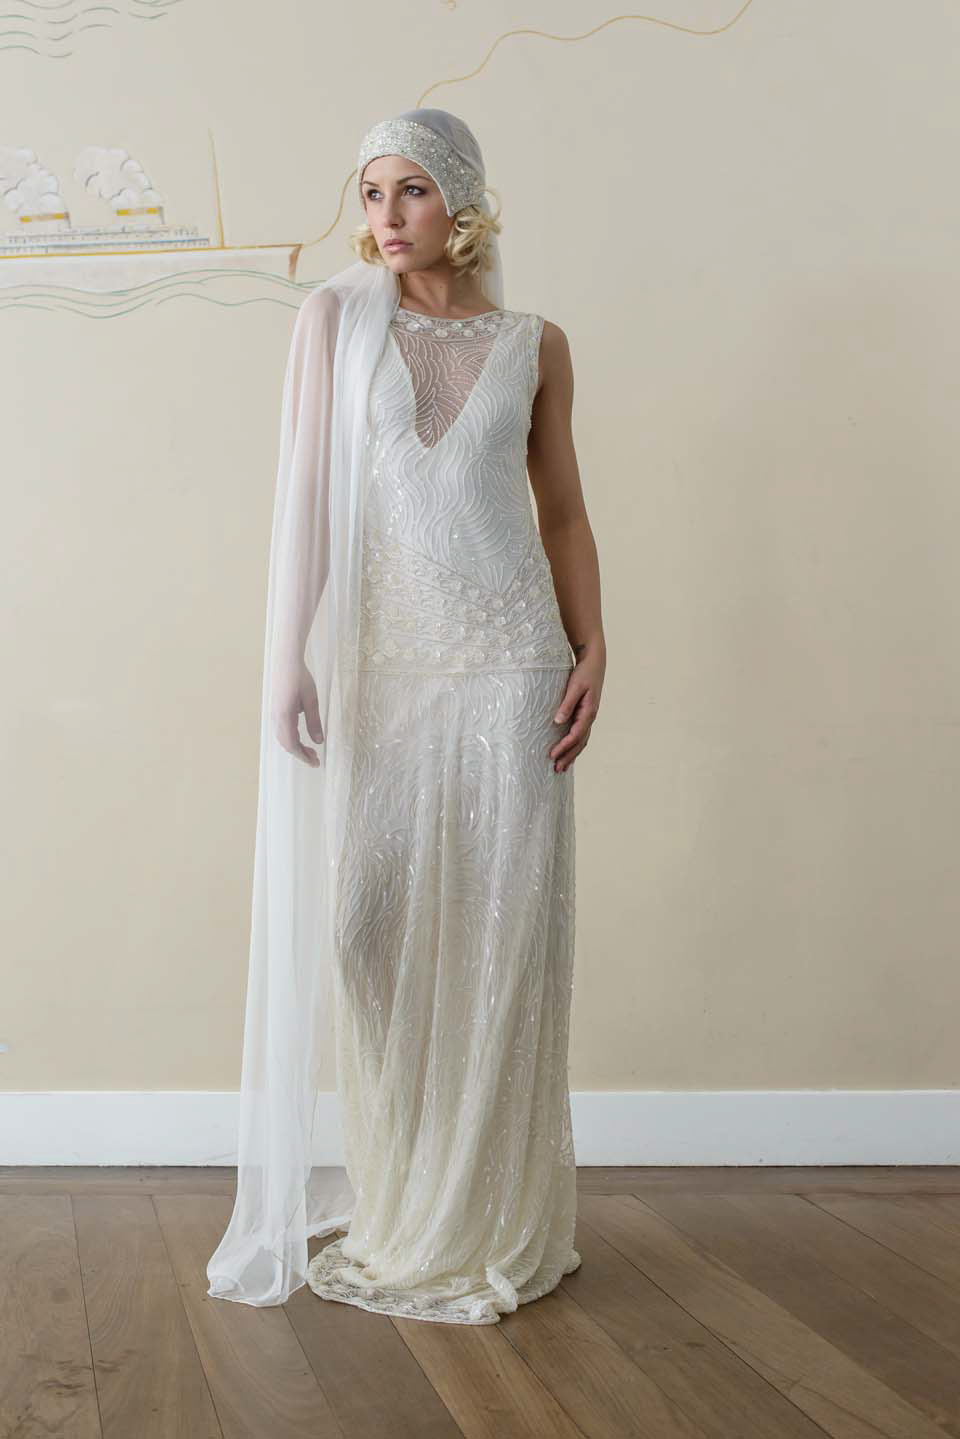 1920s Inspired Wedding Dresses
 Vicky Rowe A Debut Collection of 1920s and 1930s Inspired